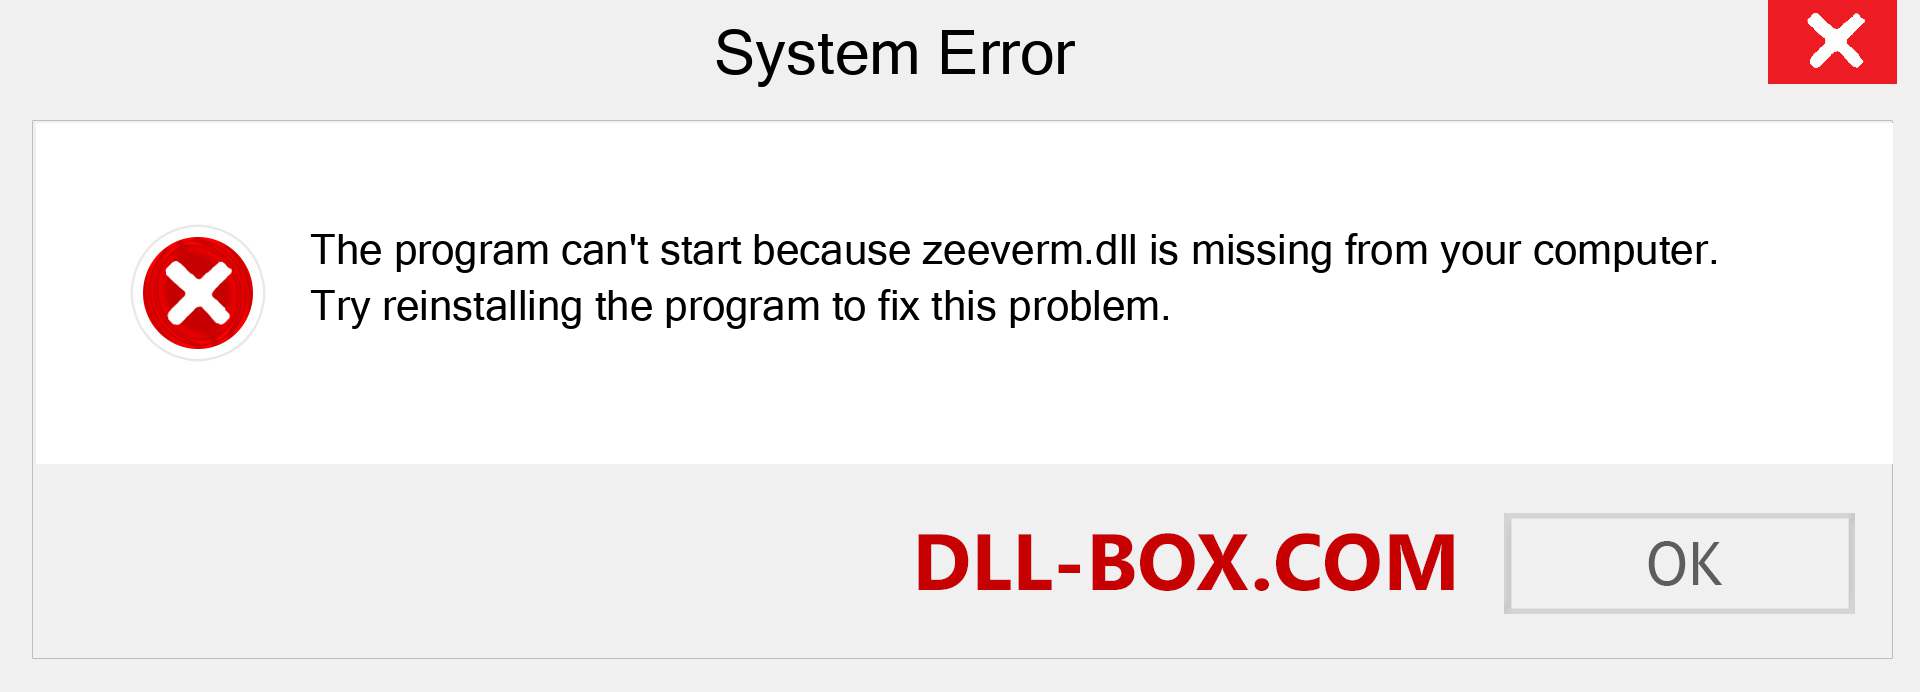  zeeverm.dll file is missing?. Download for Windows 7, 8, 10 - Fix  zeeverm dll Missing Error on Windows, photos, images